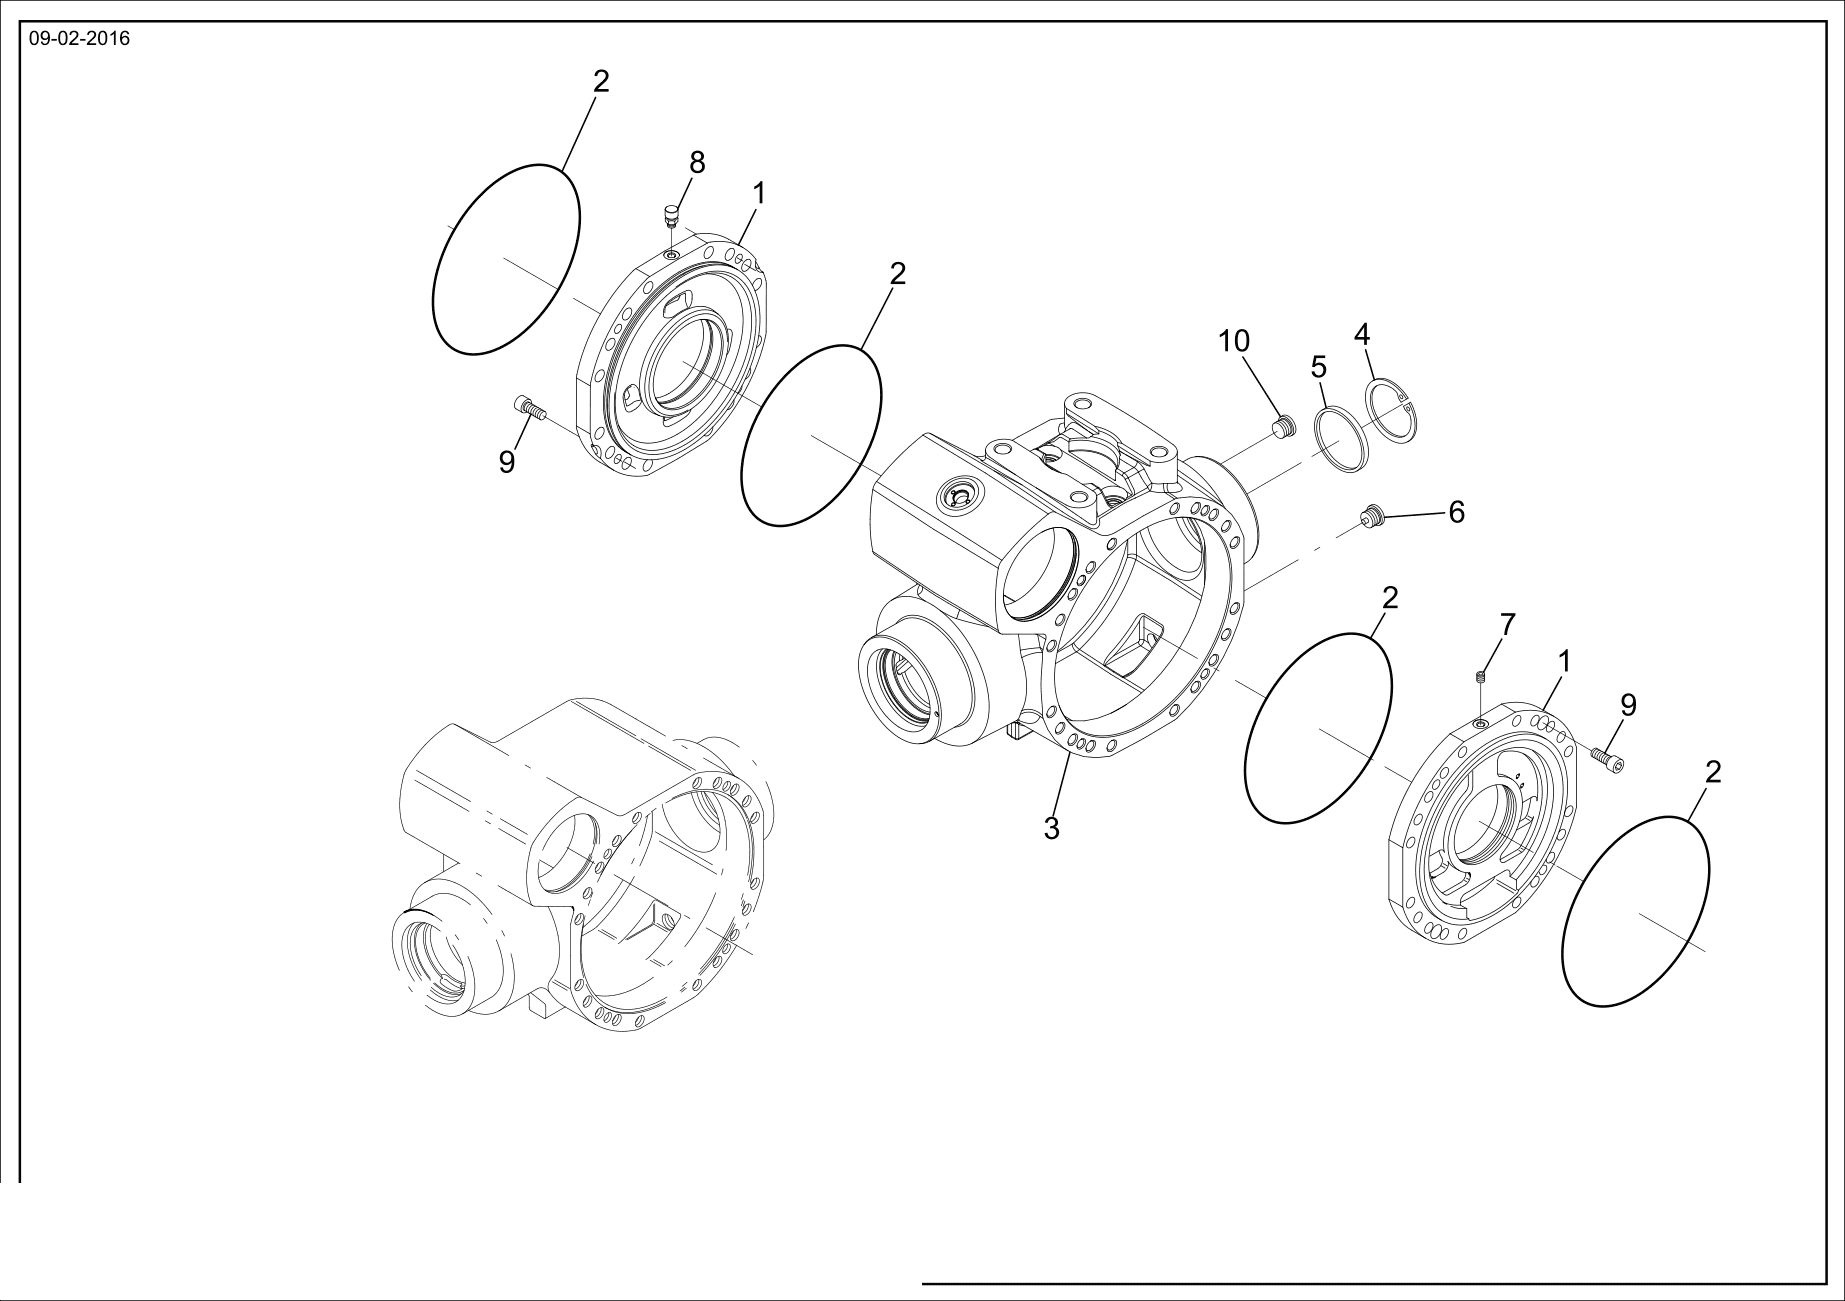 drawing for WEILER 6557 - O - RING (figure 4)